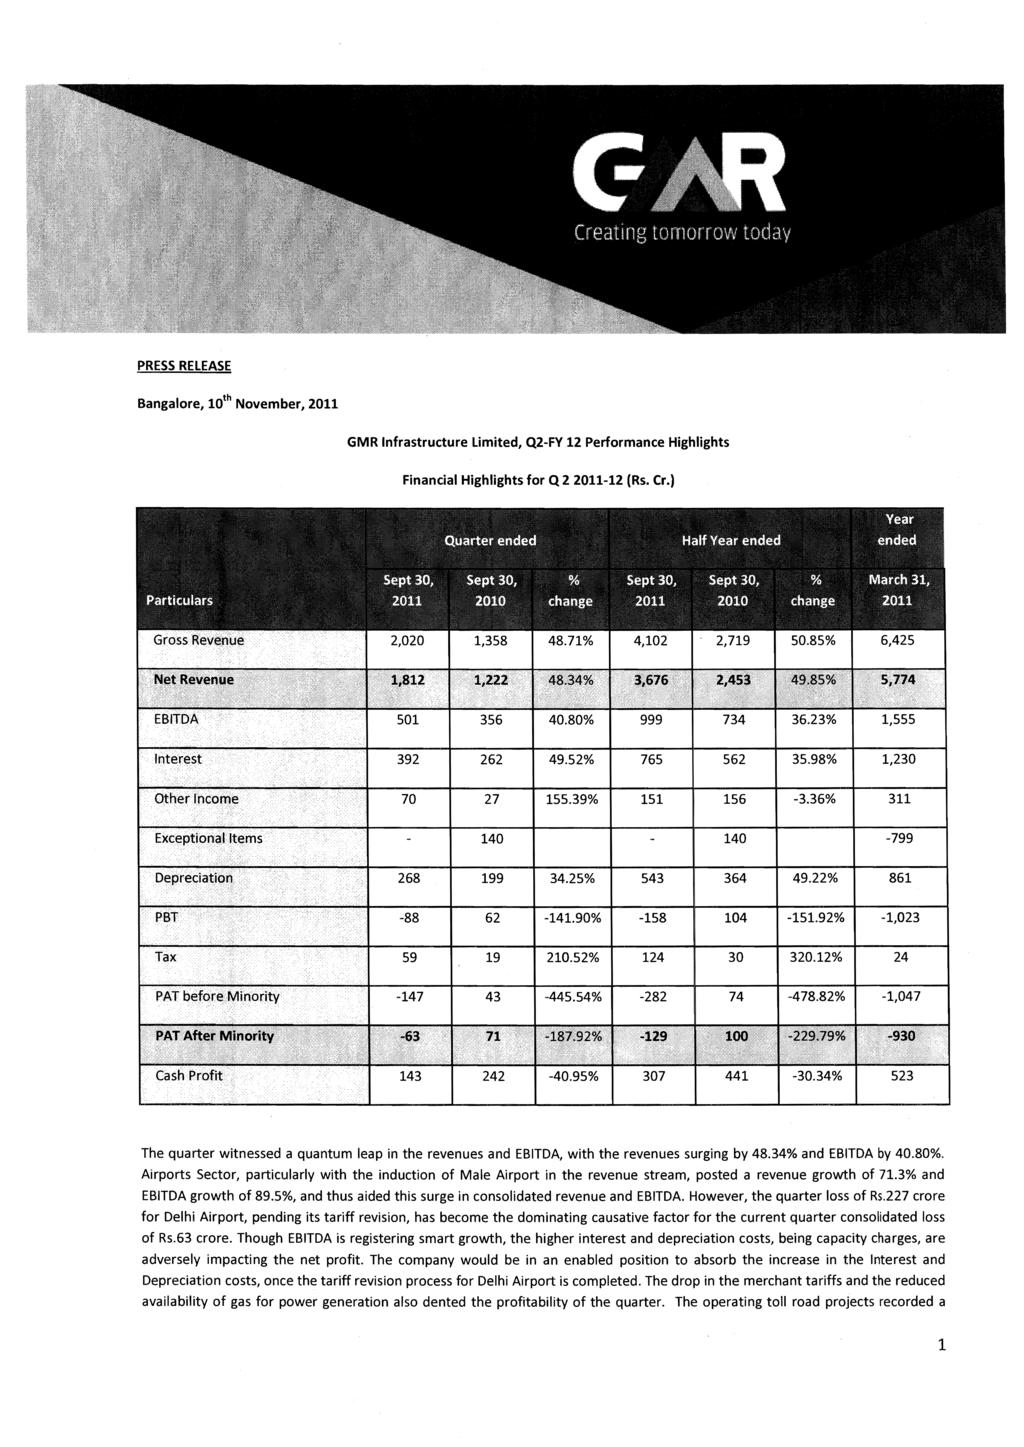 PRESS RELEASE Bangalore, 10 th November, 2011 GMR Infrastructure Limited, Q2-FY 12 Performance Highlights Financial Highlights for Q 2 2011-12 (Rs. Cr.) 392 262 49.52% 765 562 35.98% 1,230 70 27 155.